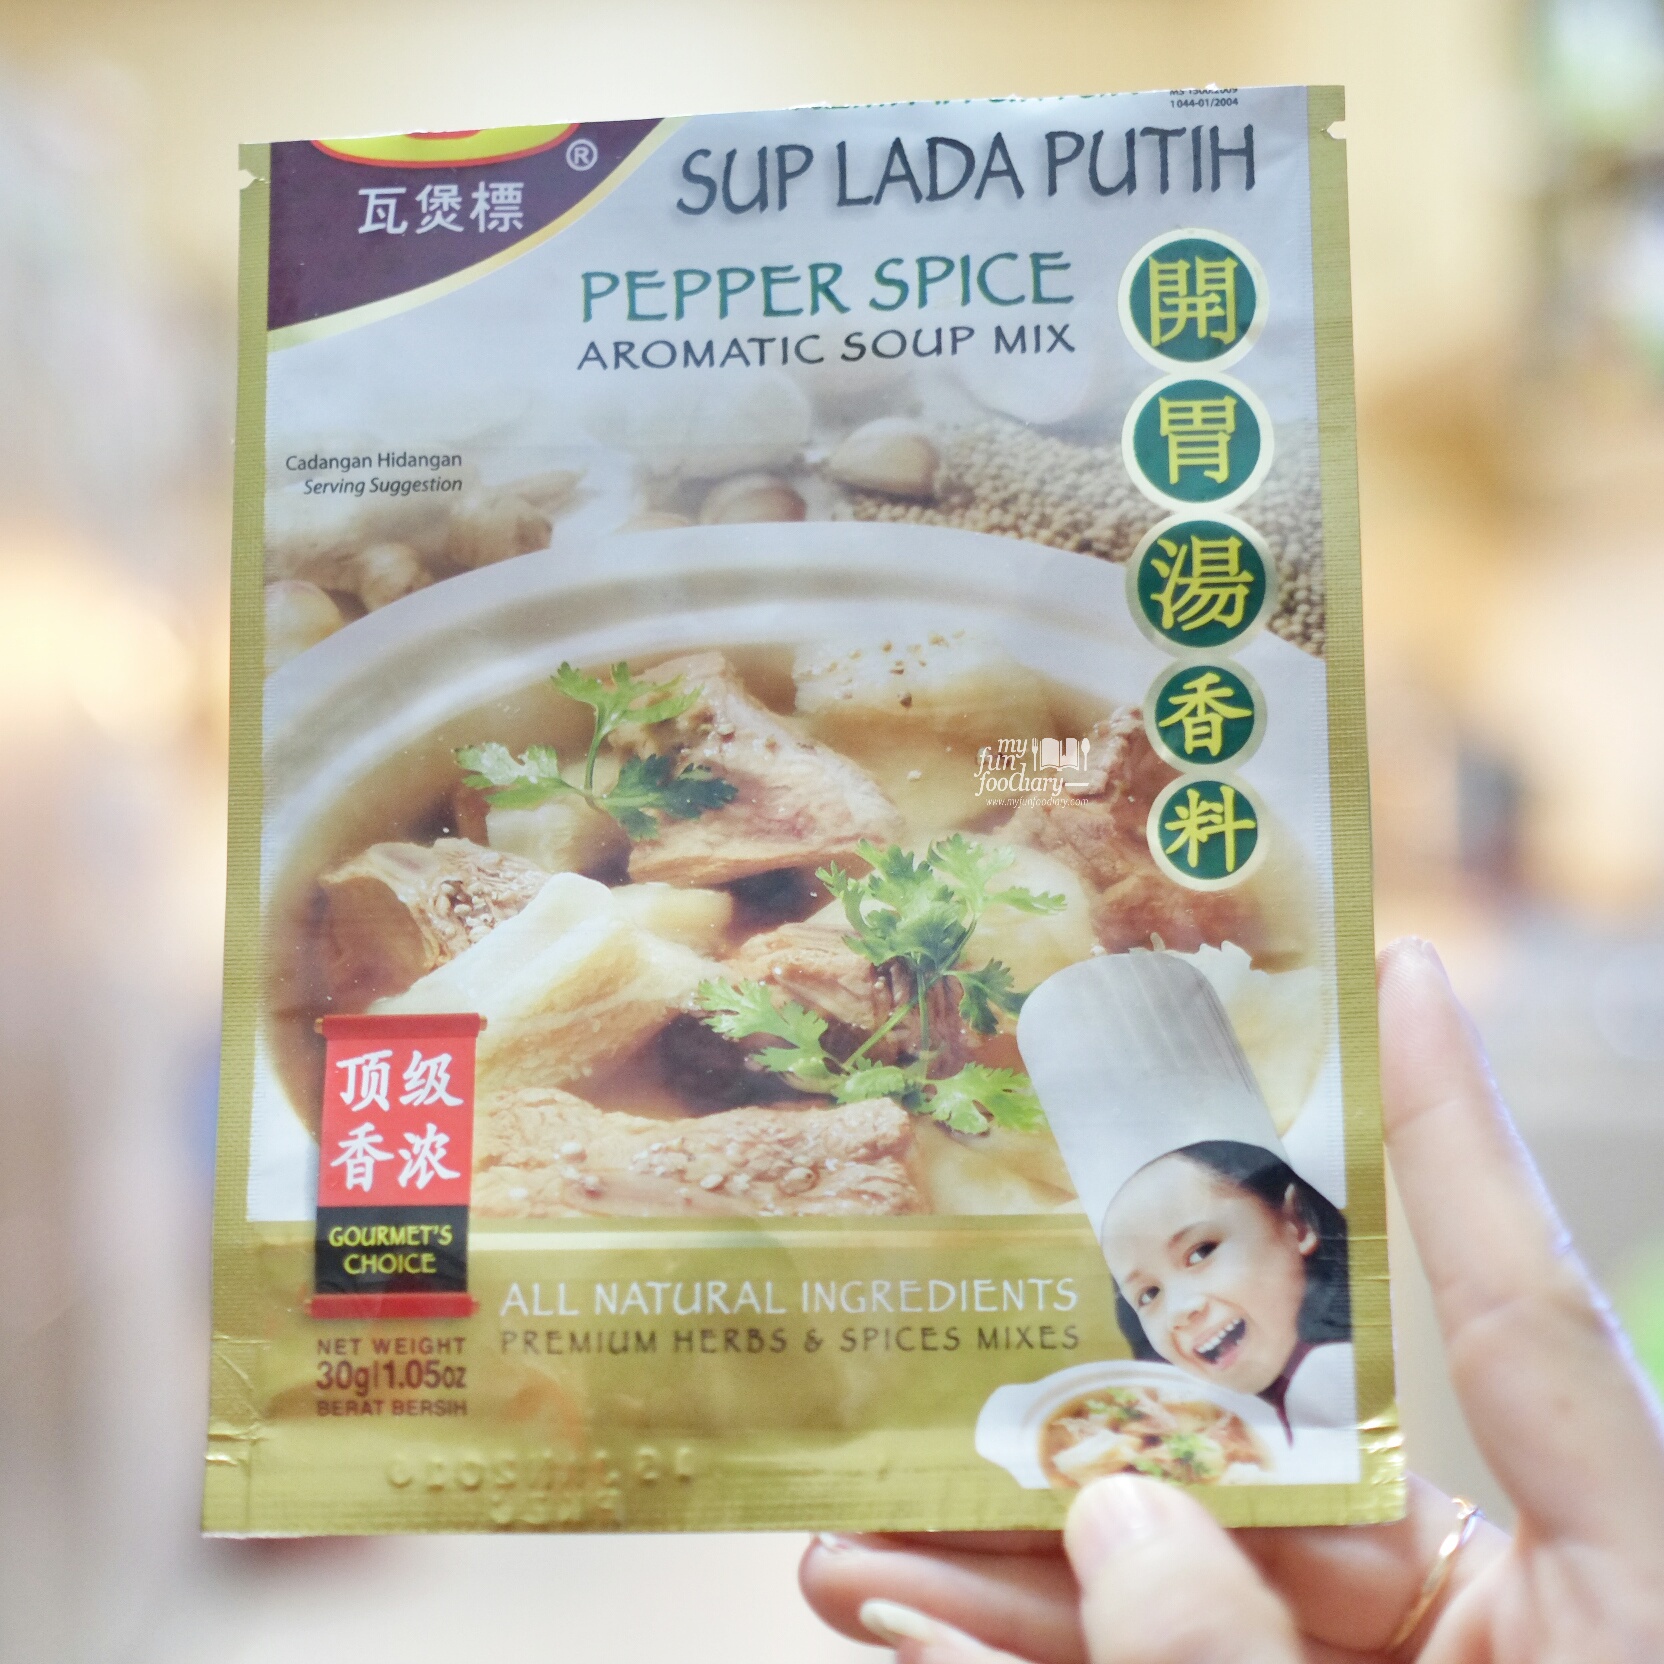 Gourmet Choice Pepper Spice Aromatic Soup Mix by Myfunfoodiary